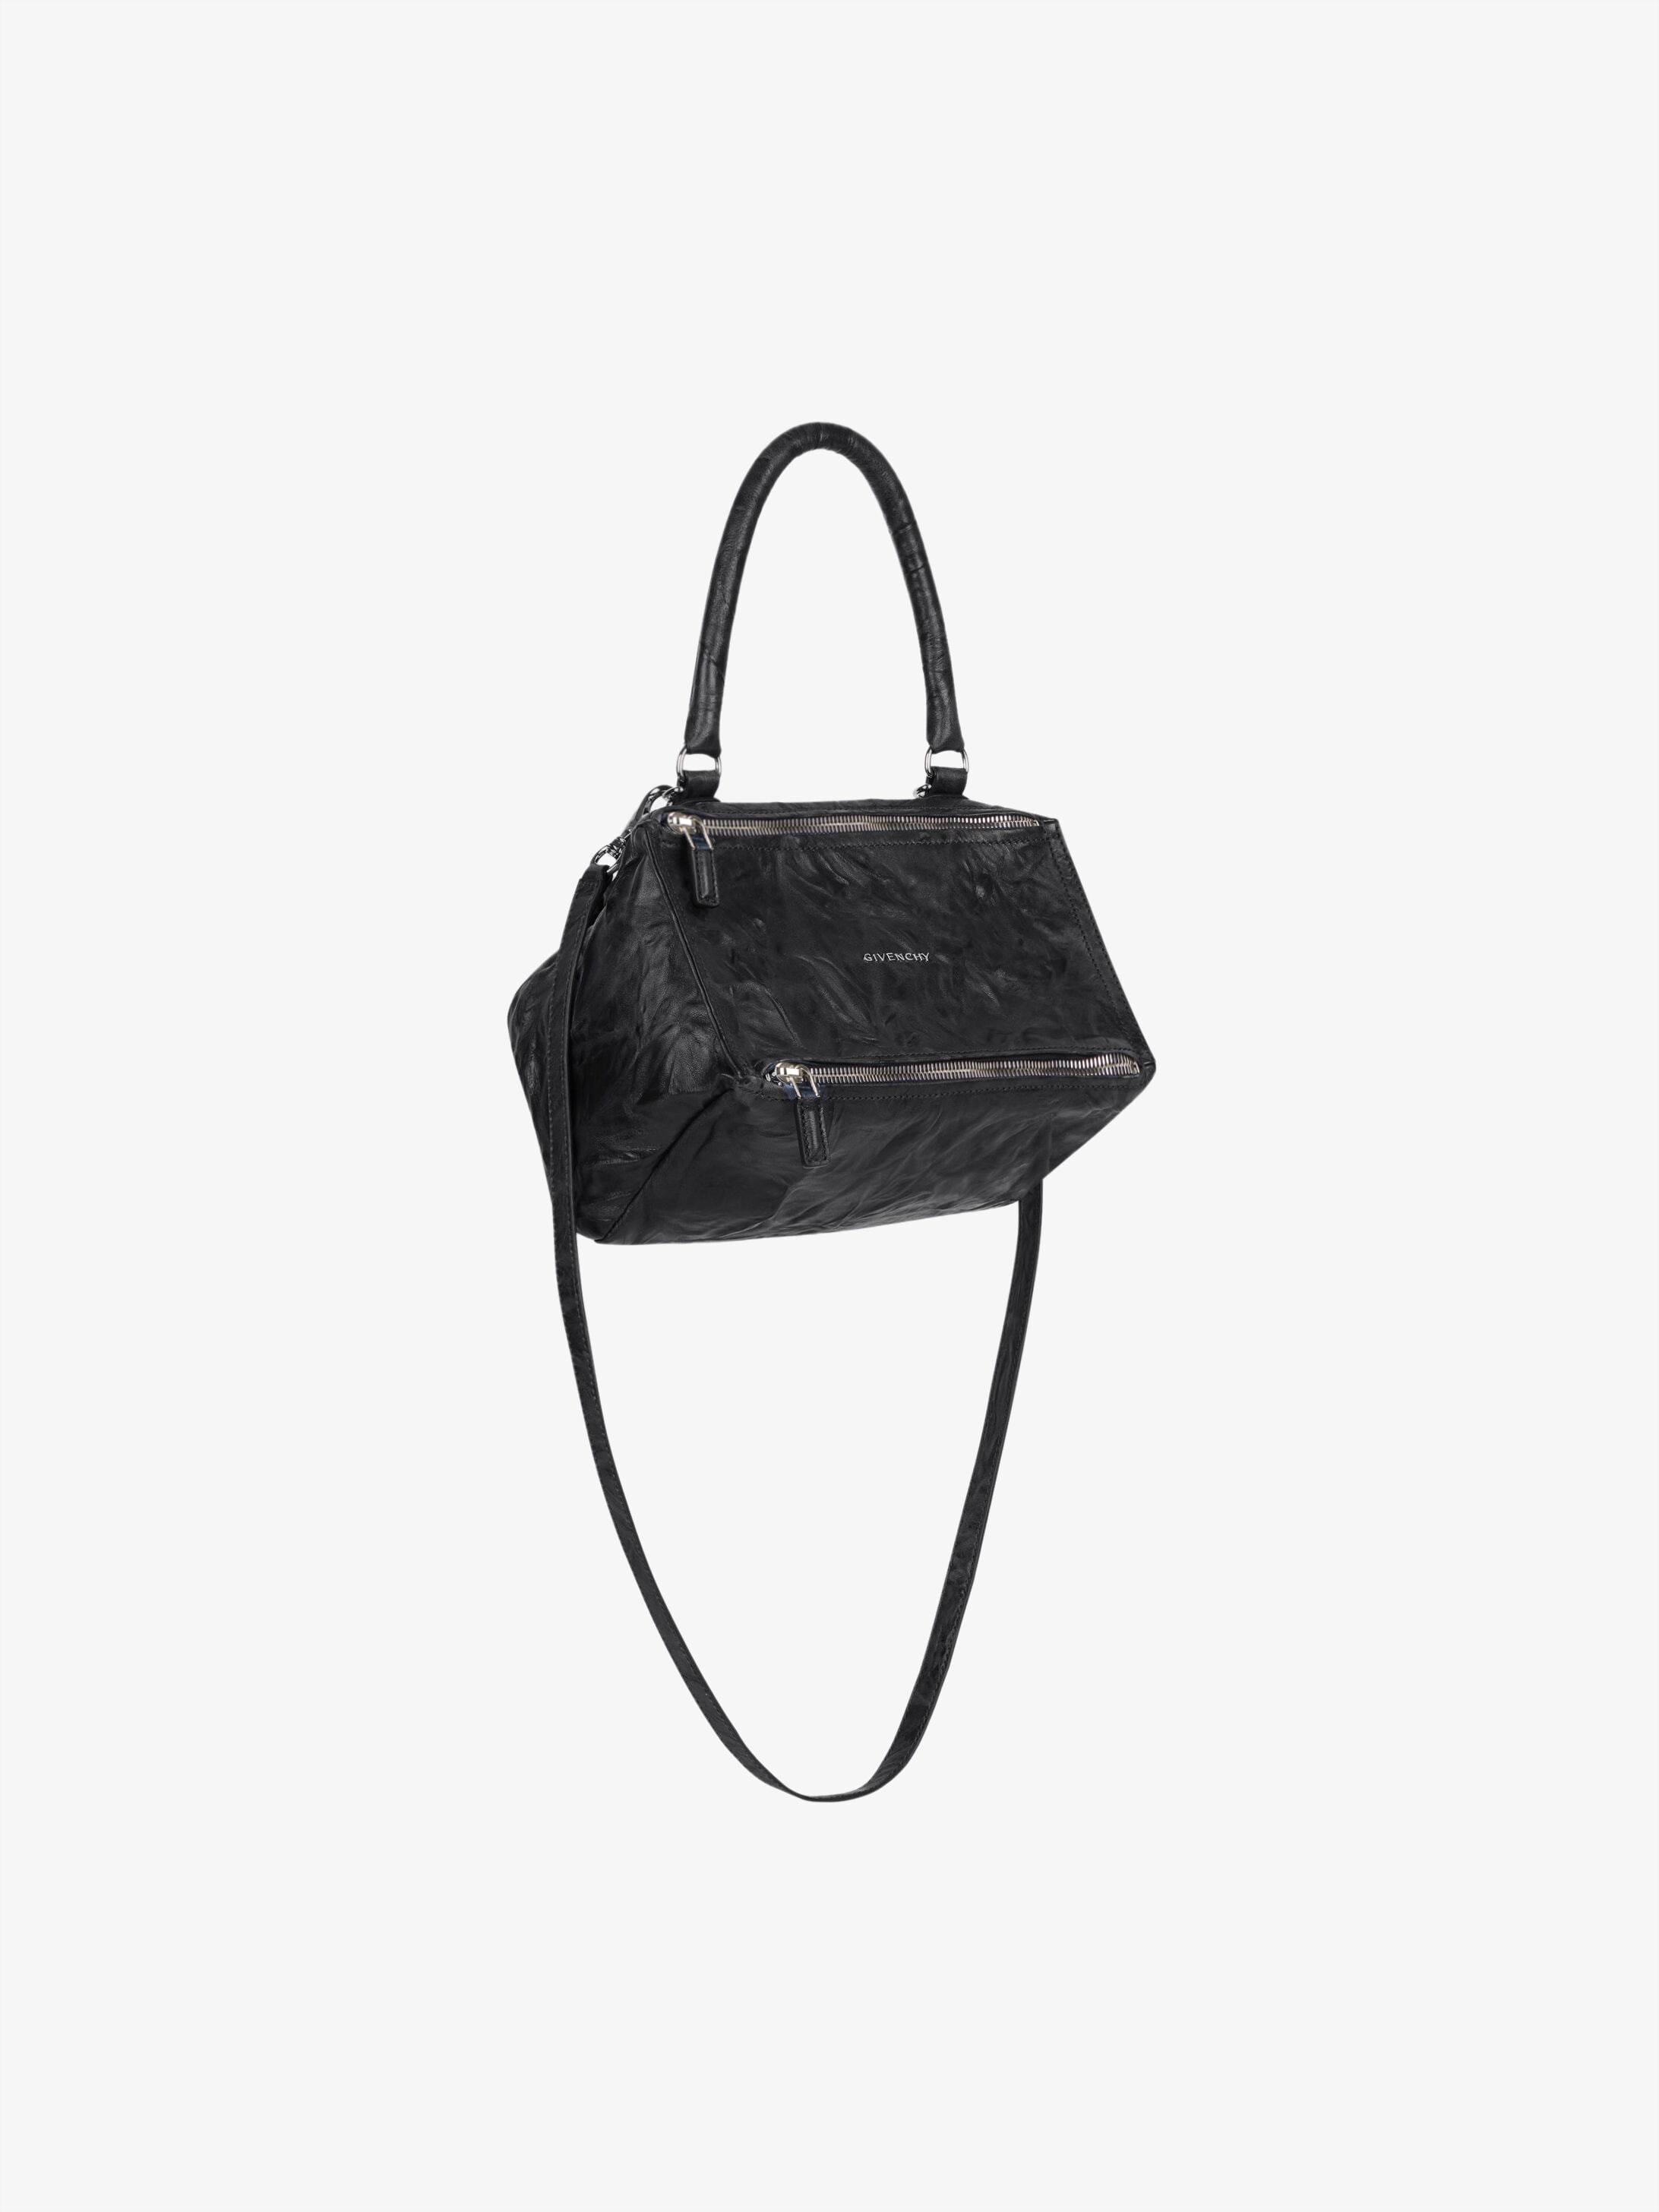 givenchy one handle bag